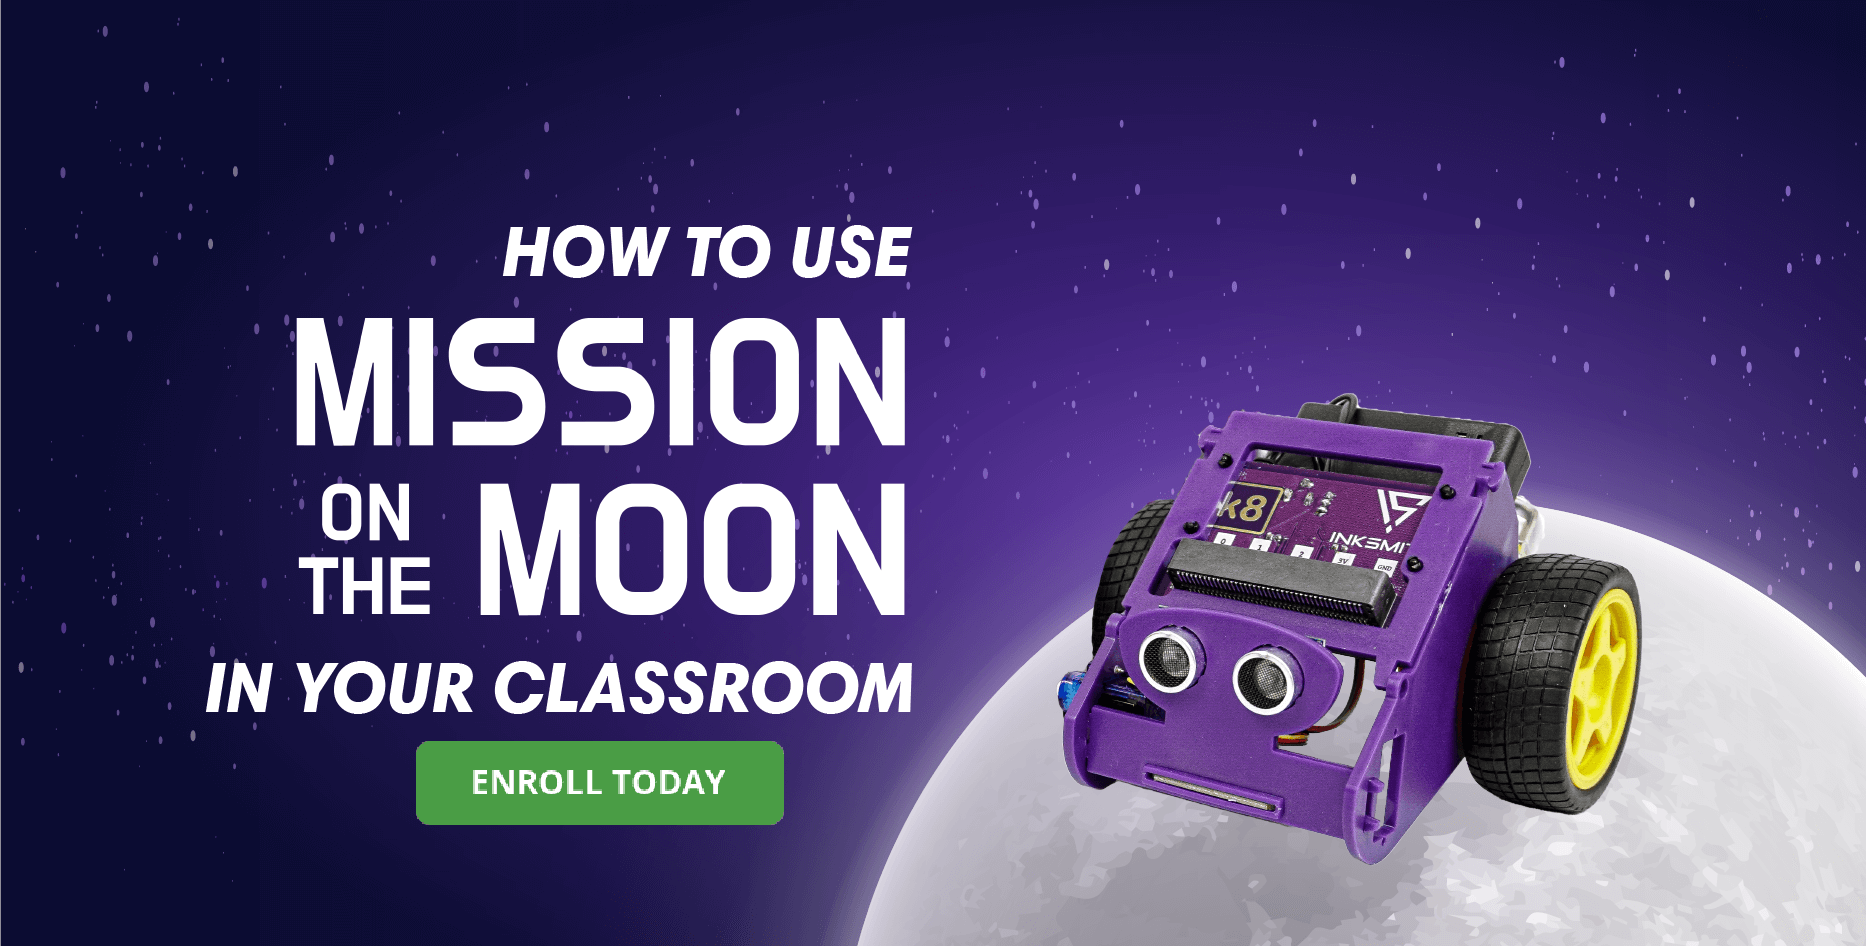 Enroll in Mission on the Moon